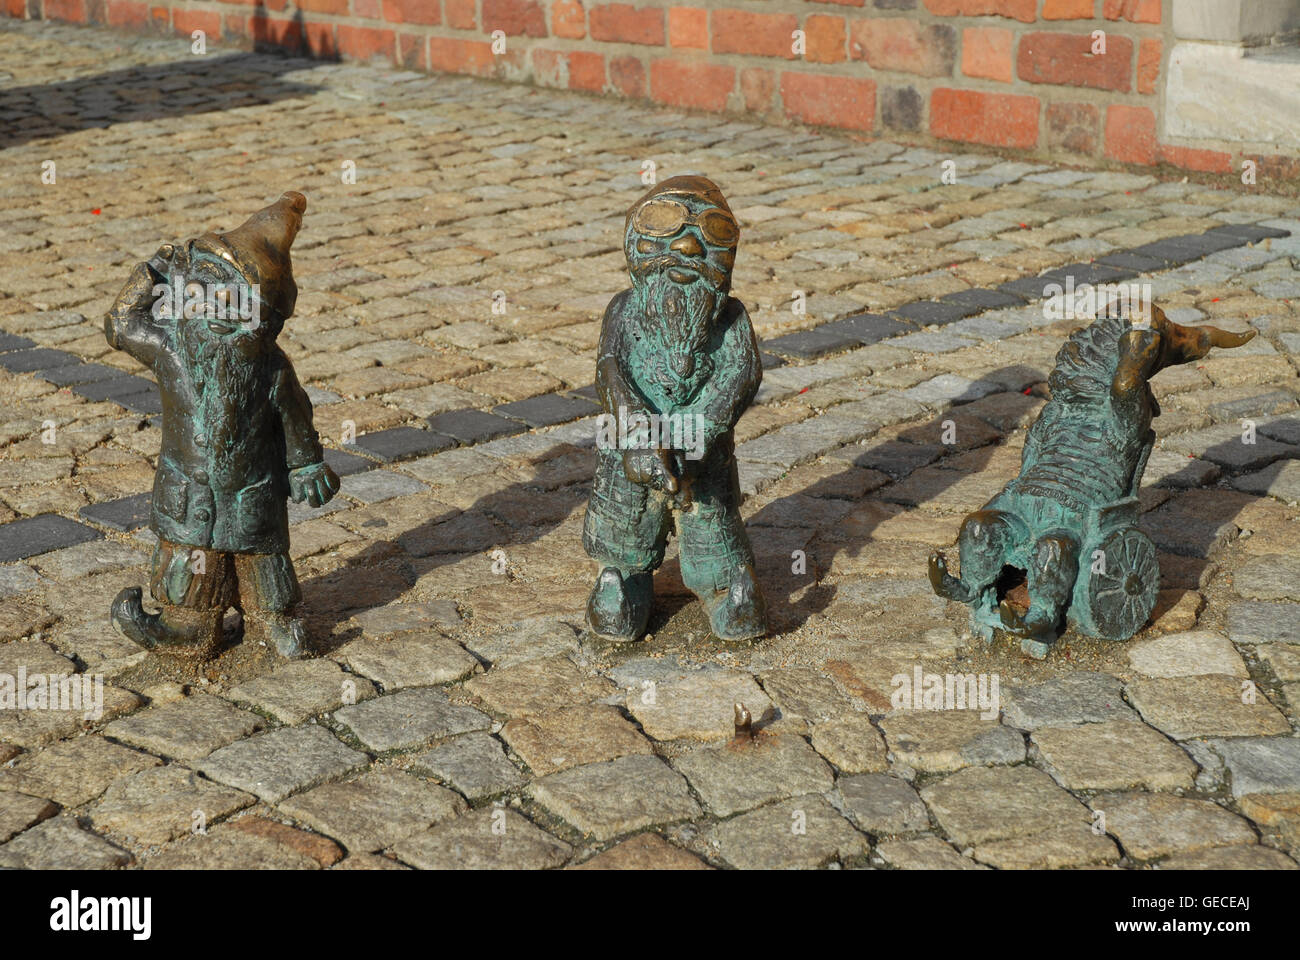 One of Wrocław’s most popular and iconic attractions - a dwarf  trio- unlikely symbol of one of Poland's most picturesque citie. Stock Photo